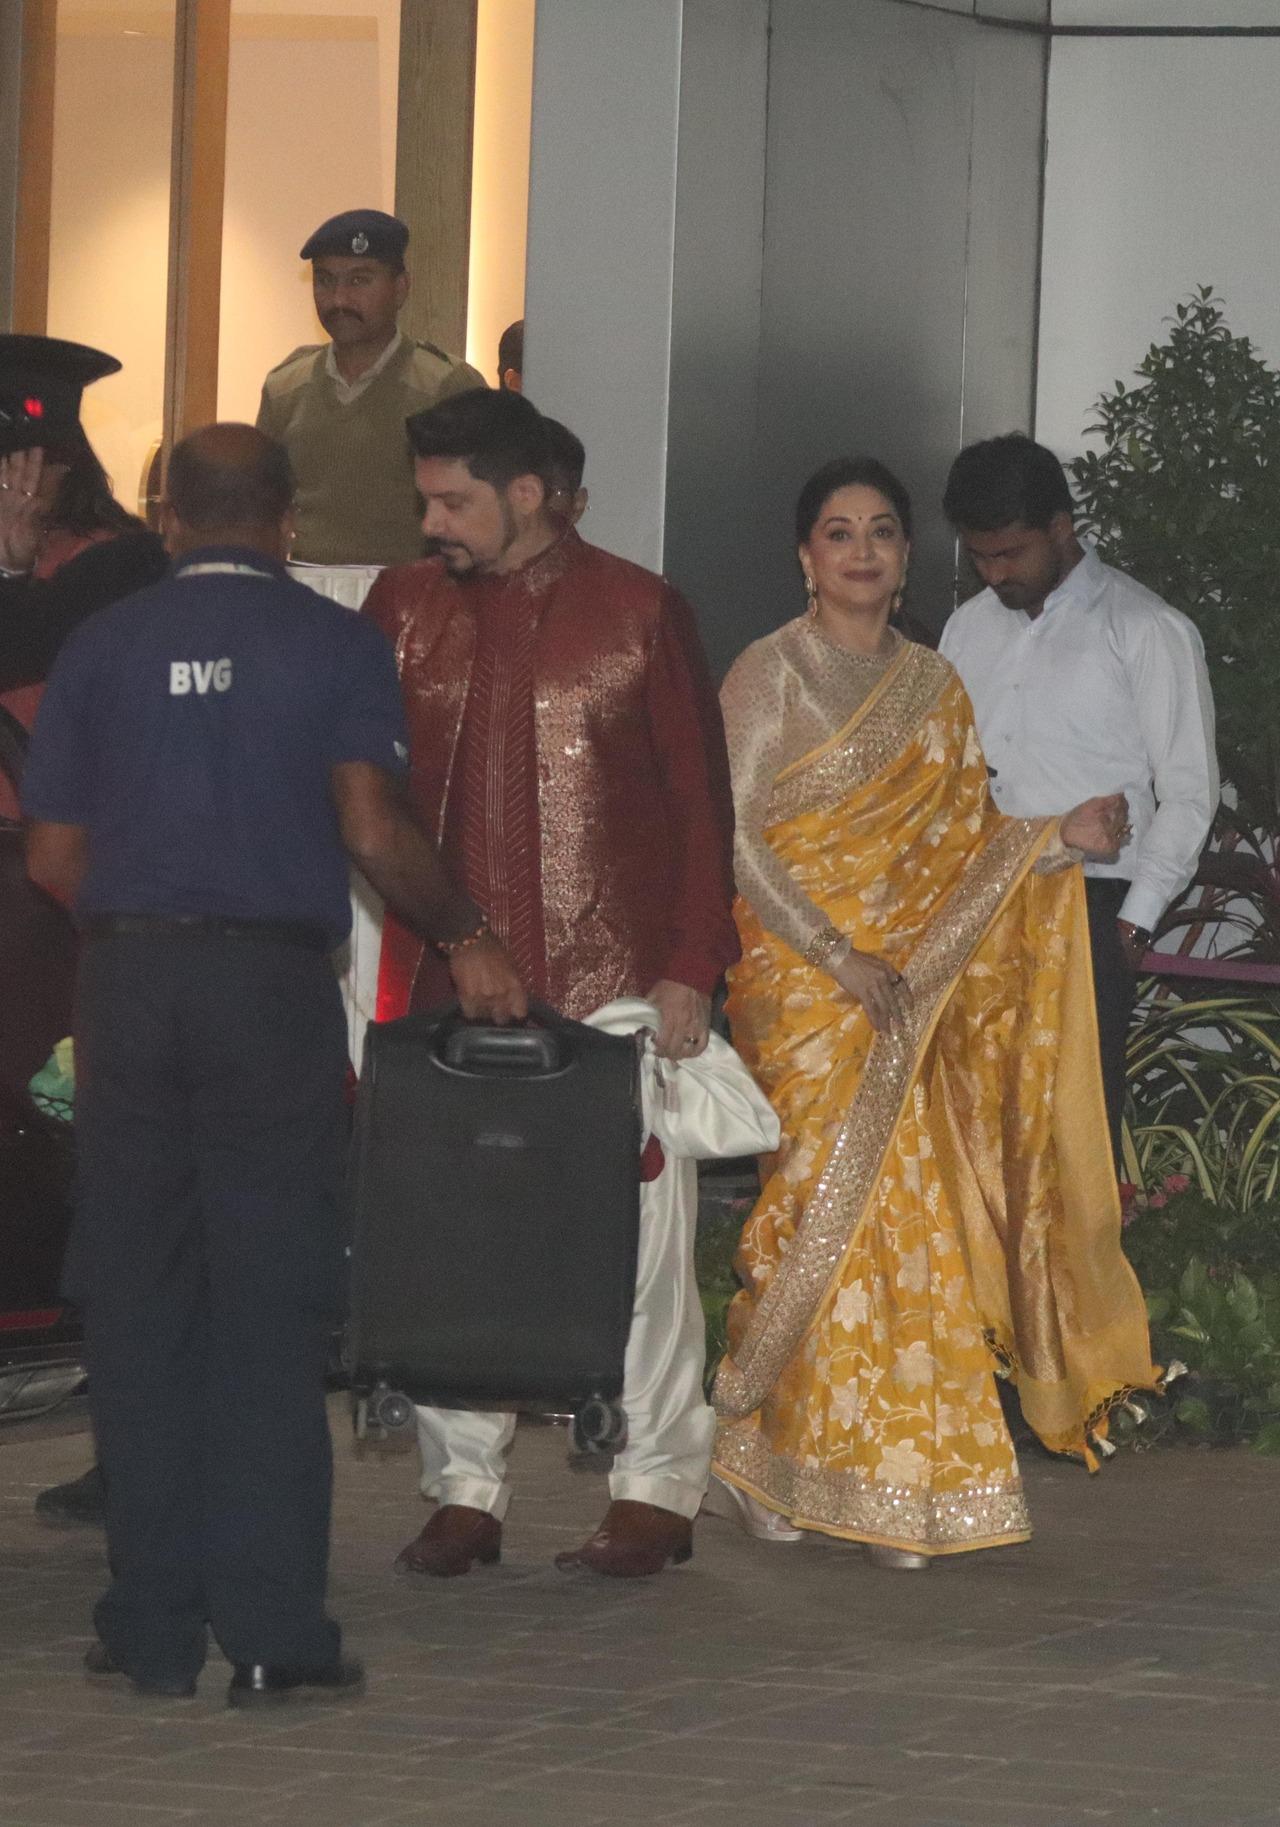 Madhuri Dixit opted for a gorgeous yellow saree for the occasion while Dr Nene looked sharp in a bright red kurta